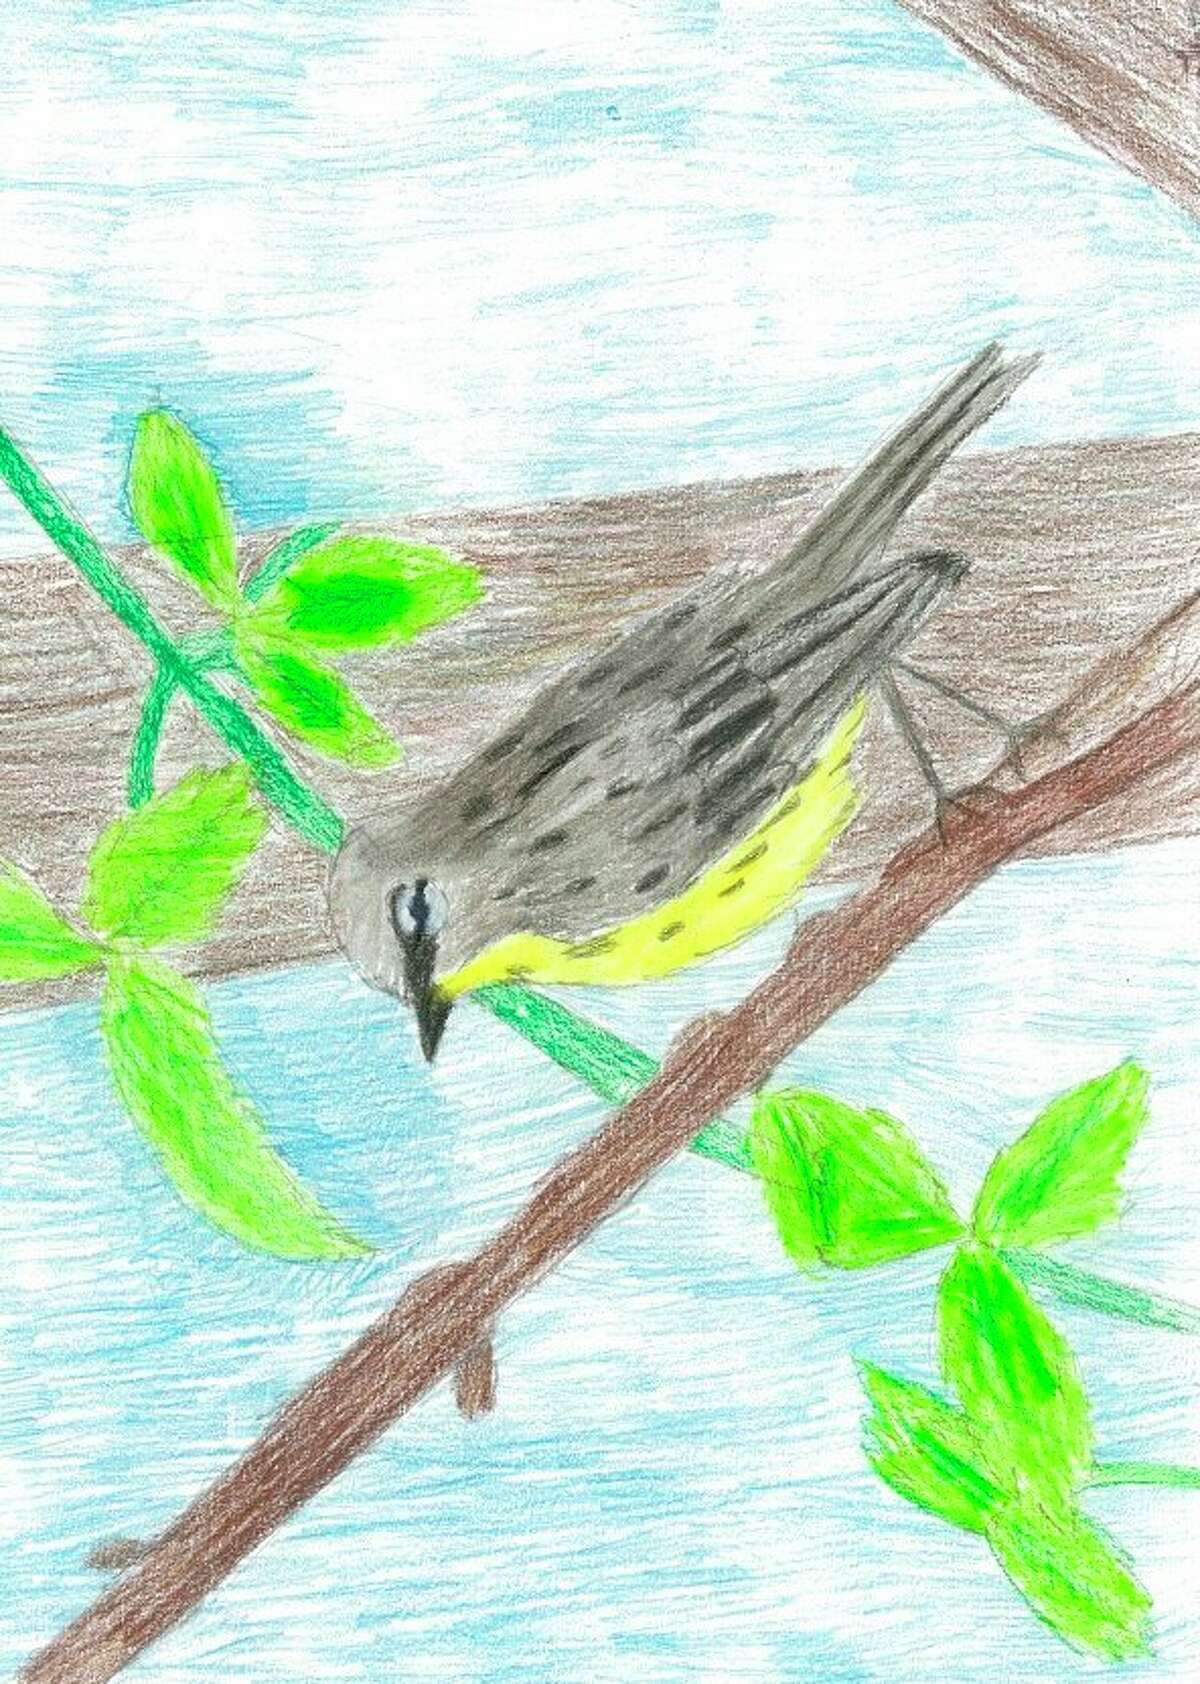 The winner of the 2019 Young Artists Contest, a piece by Grayling fifth-grader Tierney Hartman, is pictured. (Courtesy photo)